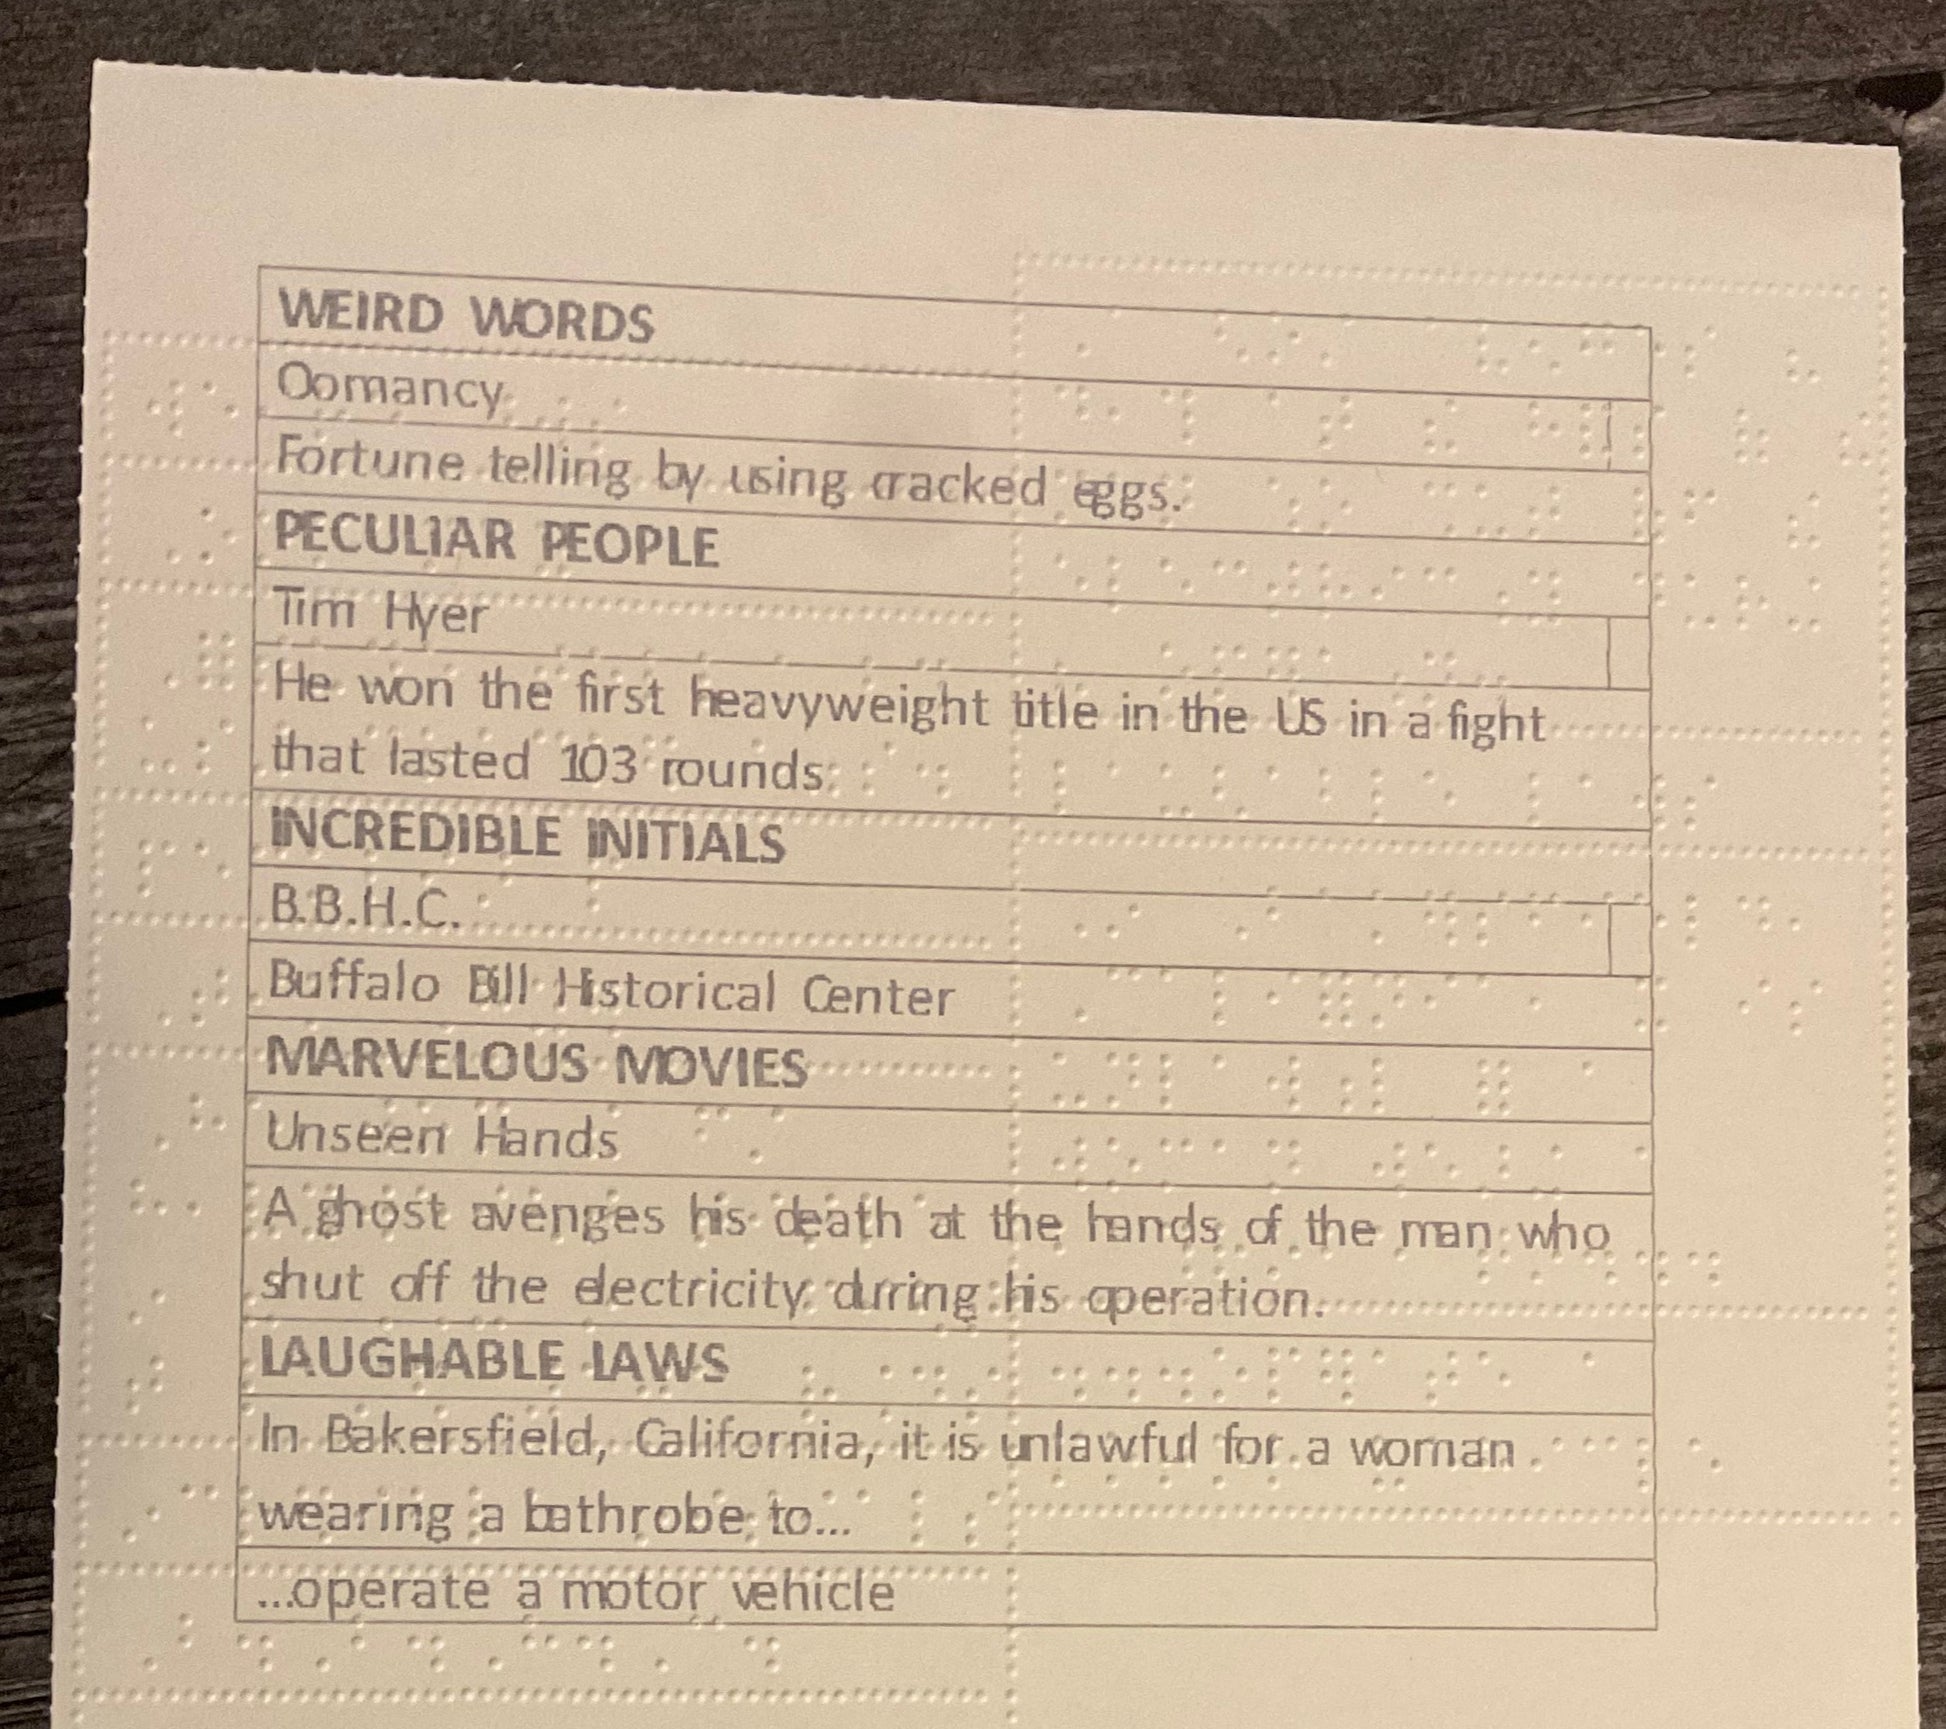 A picture of one of the large print/braille cards showing the different words that people may have to define